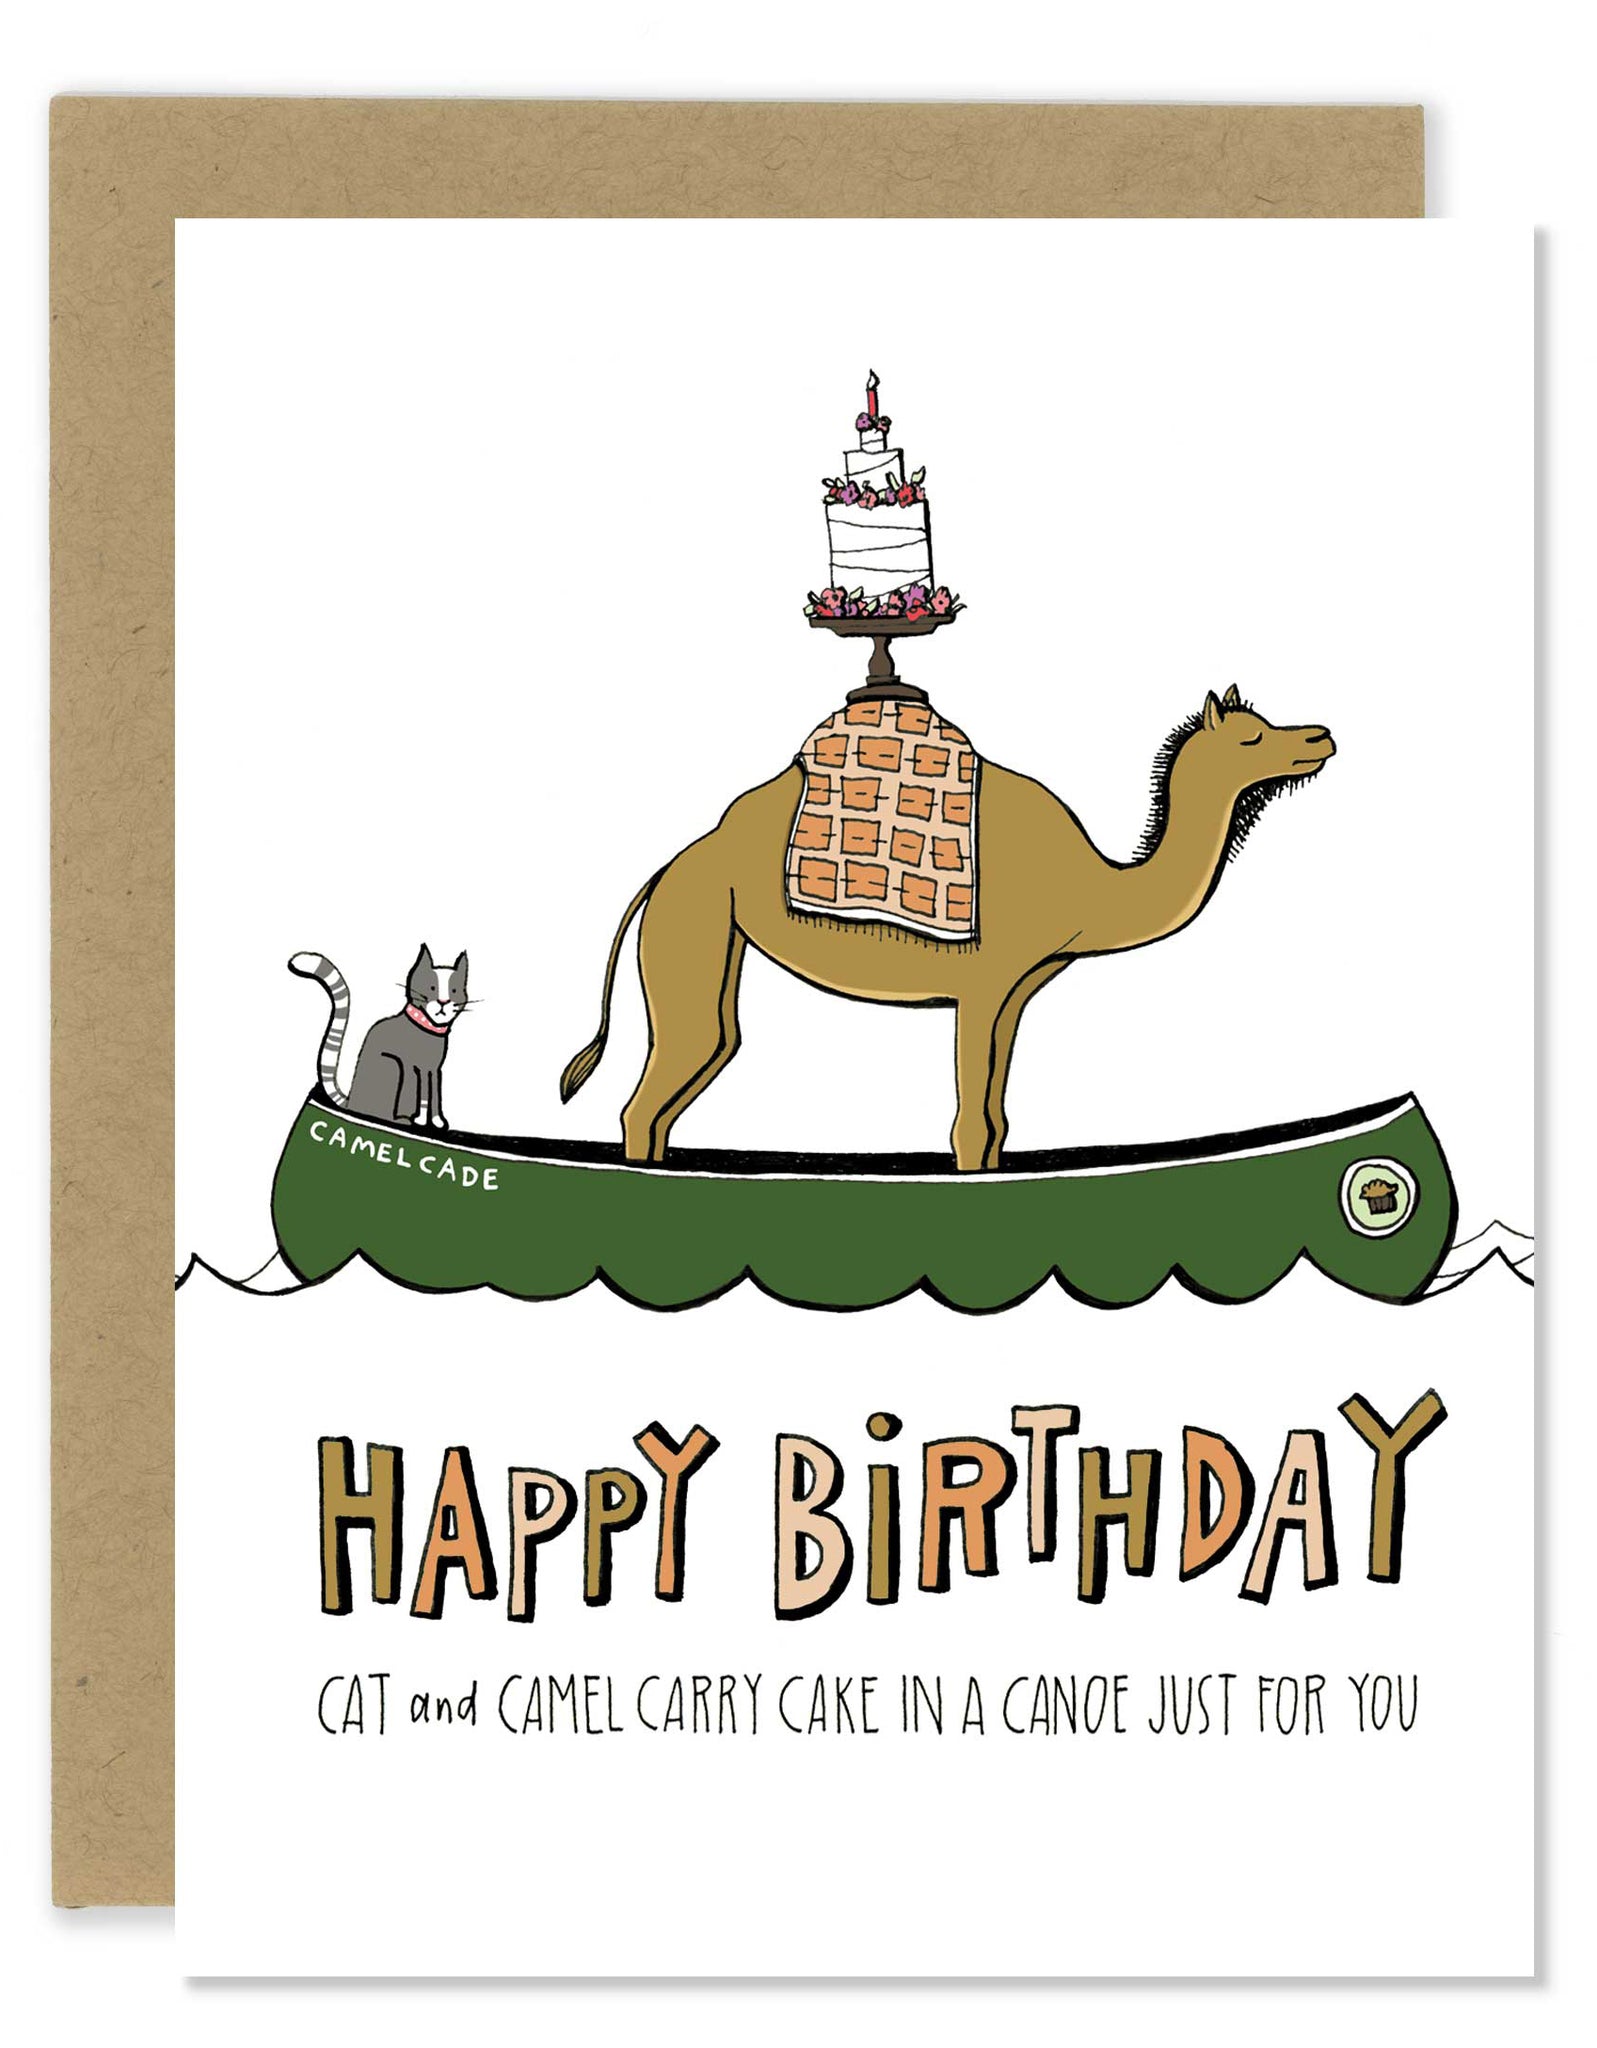 Birthday Card  Let's Make a Big Deal Fish – Sloe Gin Fizz